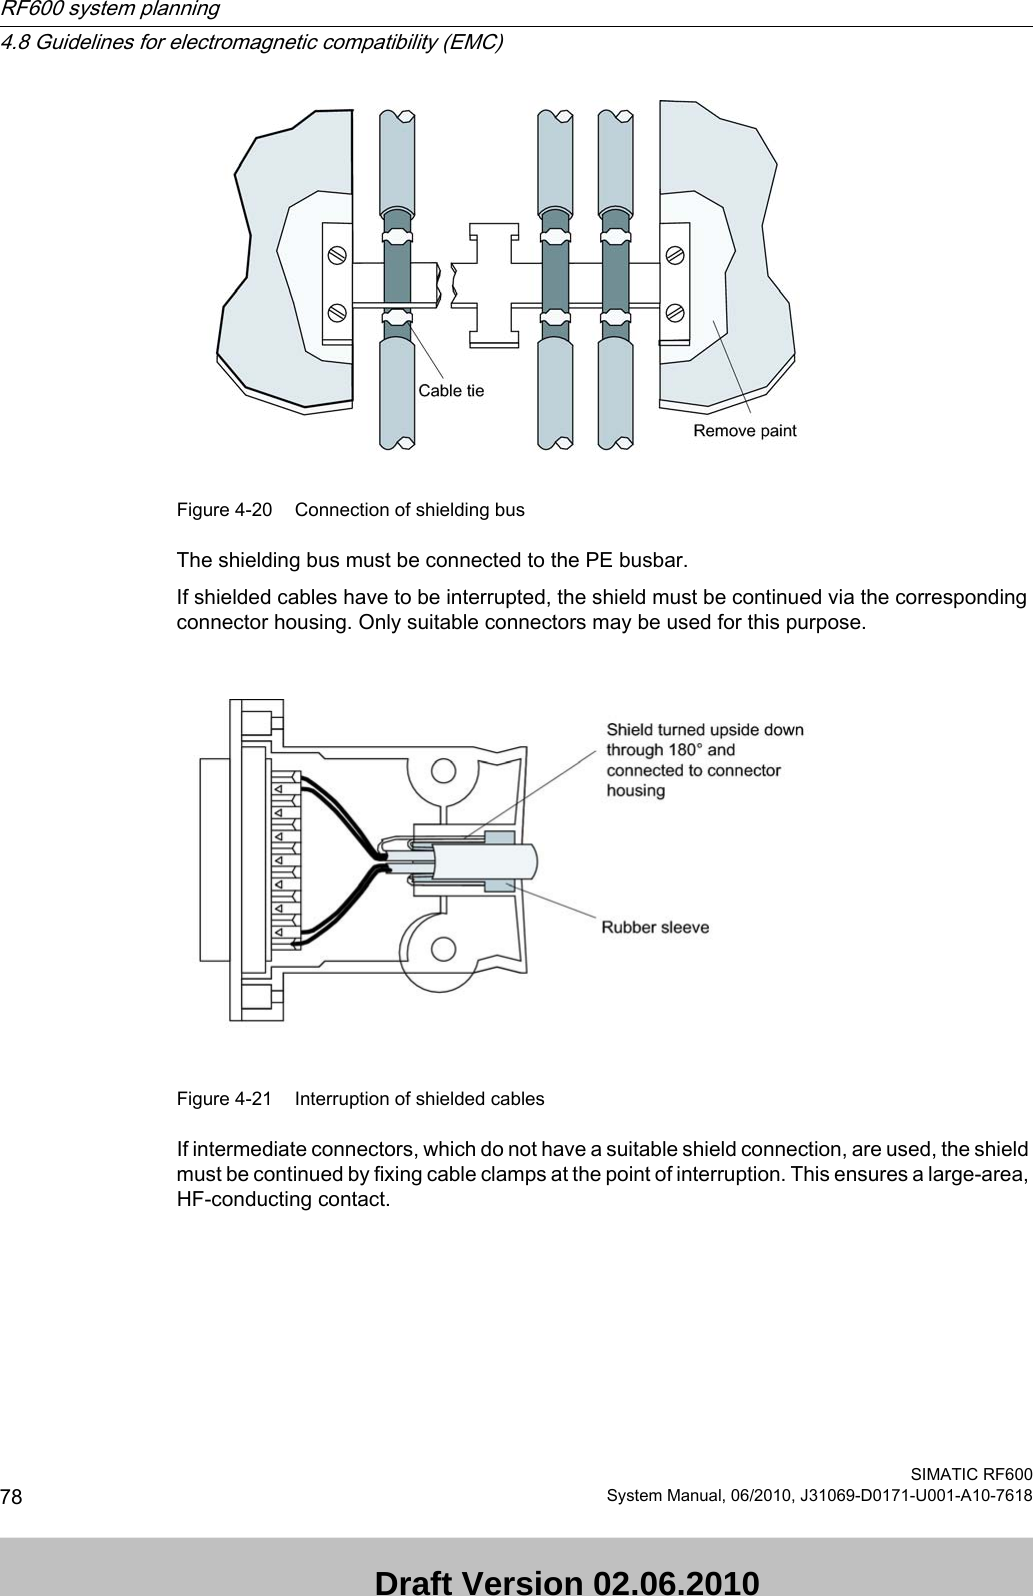 Figure 4-20 Connection of shielding busThe shielding bus must be connected to the PE busbar.If shielded cables have to be interrupted, the shield must be continued via the corresponding connector housing. Only suitable connectors may be used for this purpose. Figure 4-21 Interruption of shielded cablesIf intermediate connectors, which do not have a suitable shield connection, are used, the shield must be continued by fixing cable clamps at the point of interruption. This ensures a large-area, HF-conducting contact.RF600 system planning4.8 Guidelines for electromagnetic compatibility (EMC)SIMATIC RF60078 System Manual, 06/2010, J31069-D0171-U001-A10-7618 Draft Version 02.06.2010 